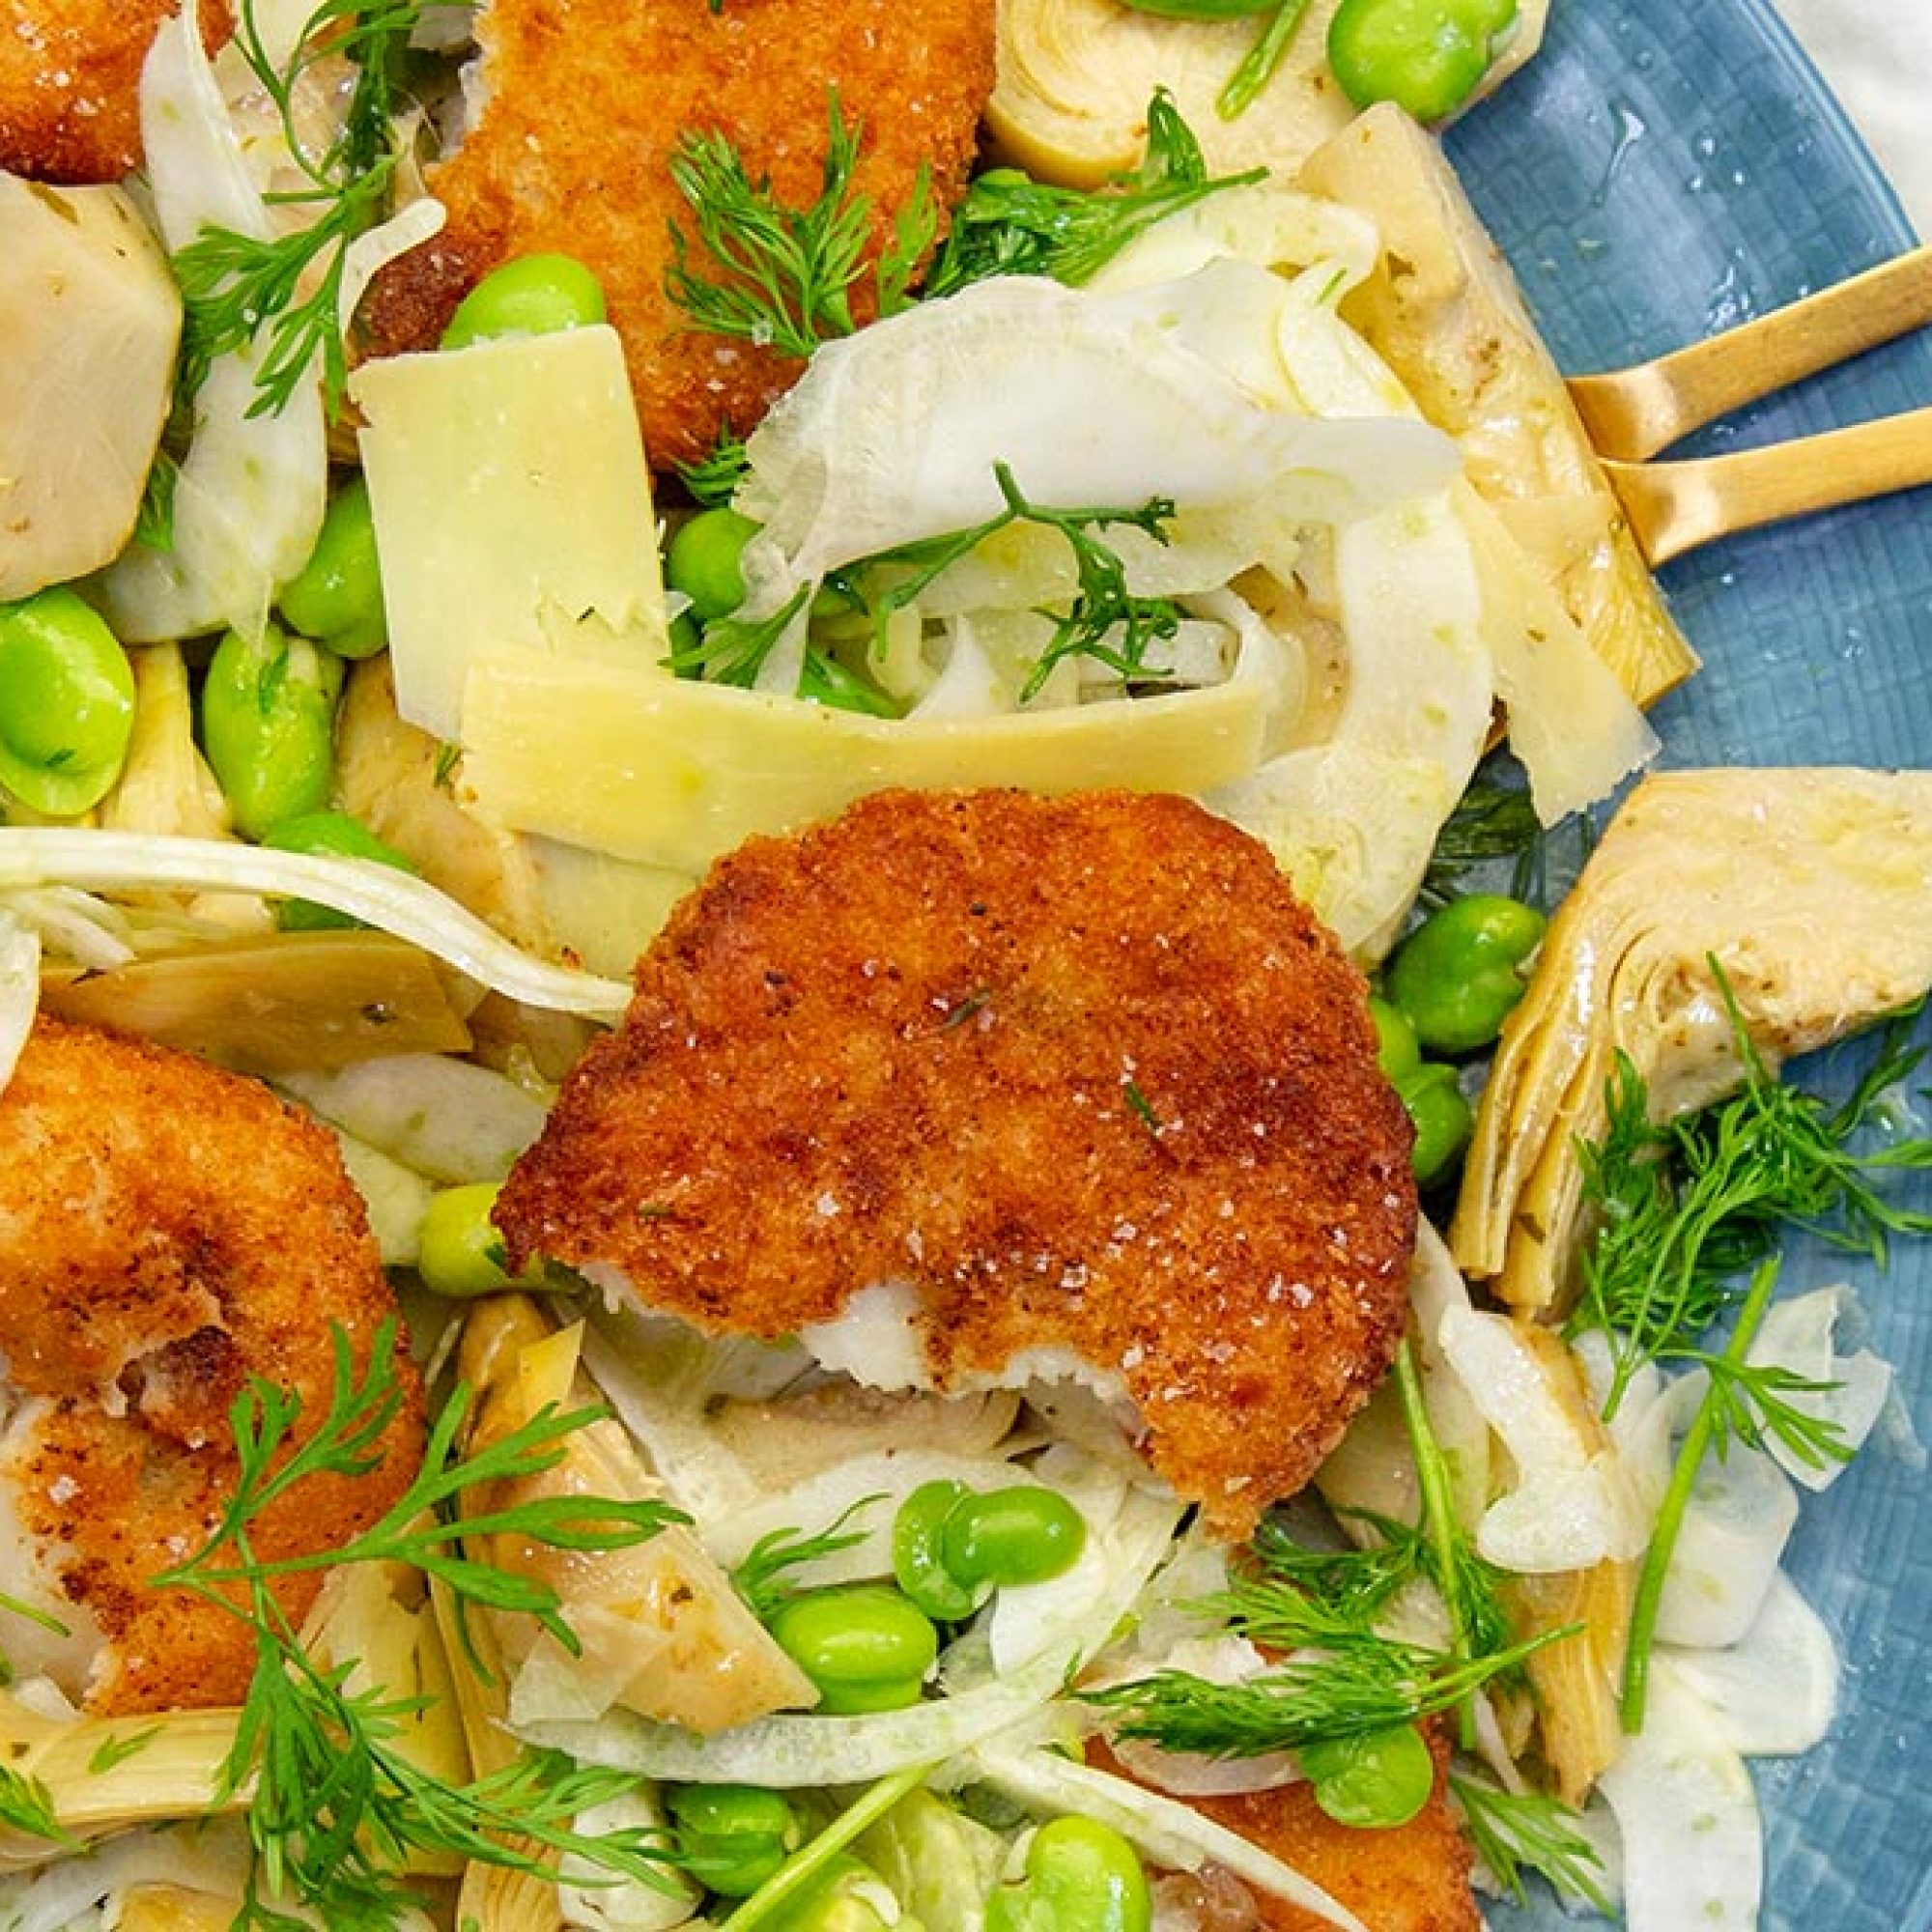 Crab Cakes with fennel, artichoke and broad bean salad